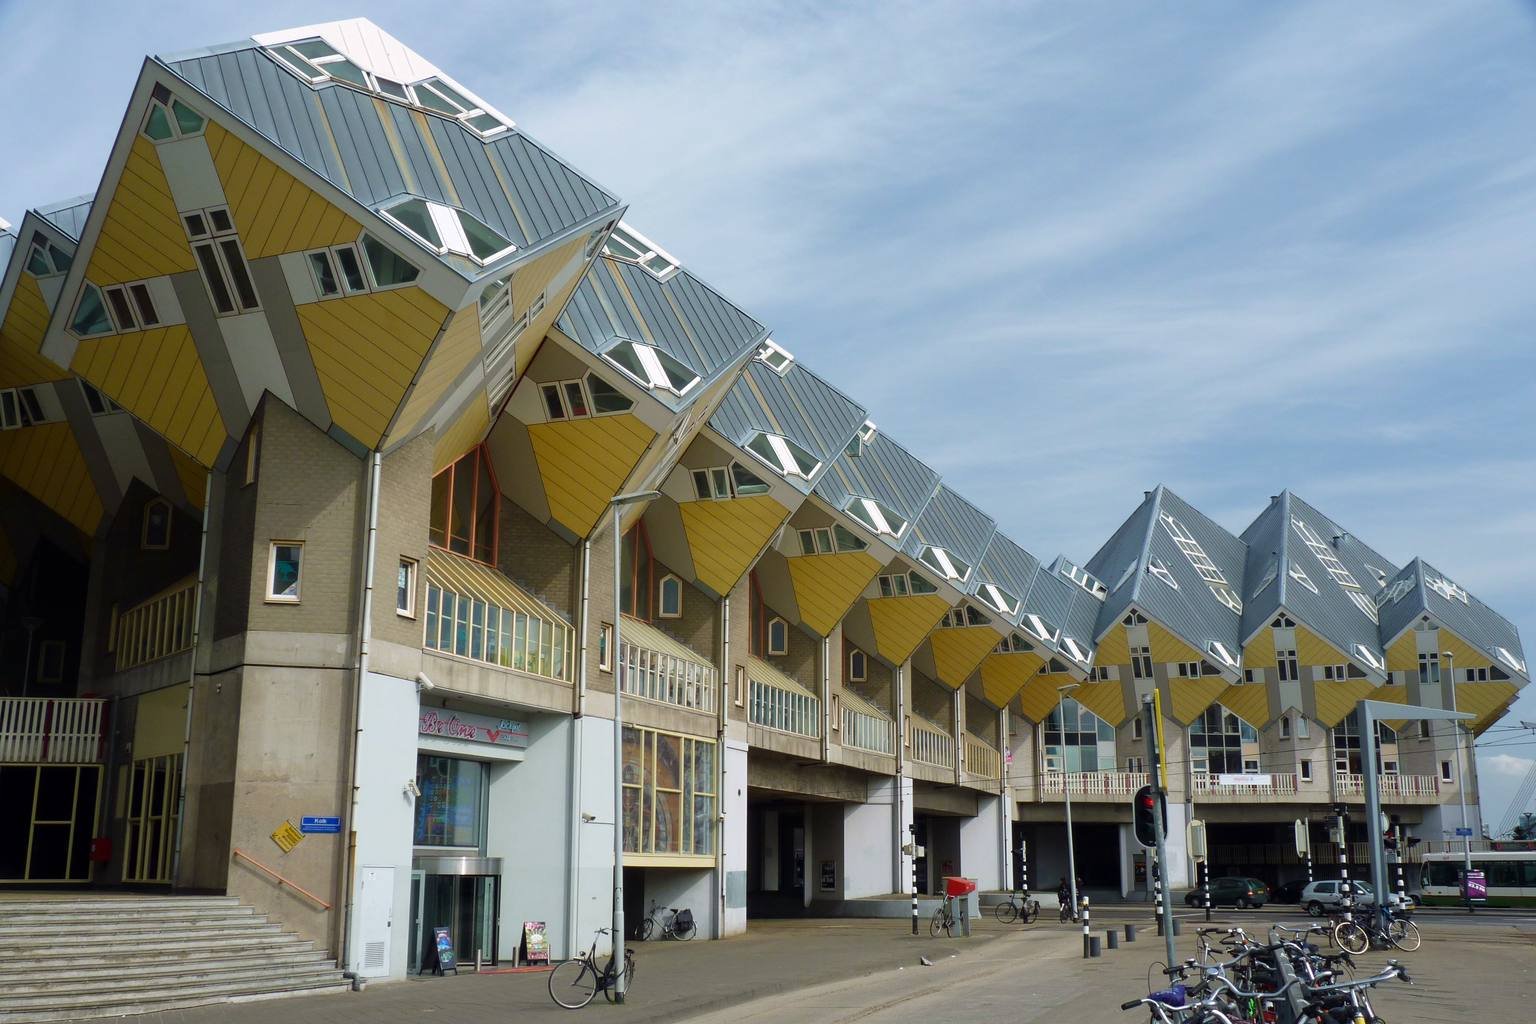 The Cube Houses (Rotterdam, Holland)